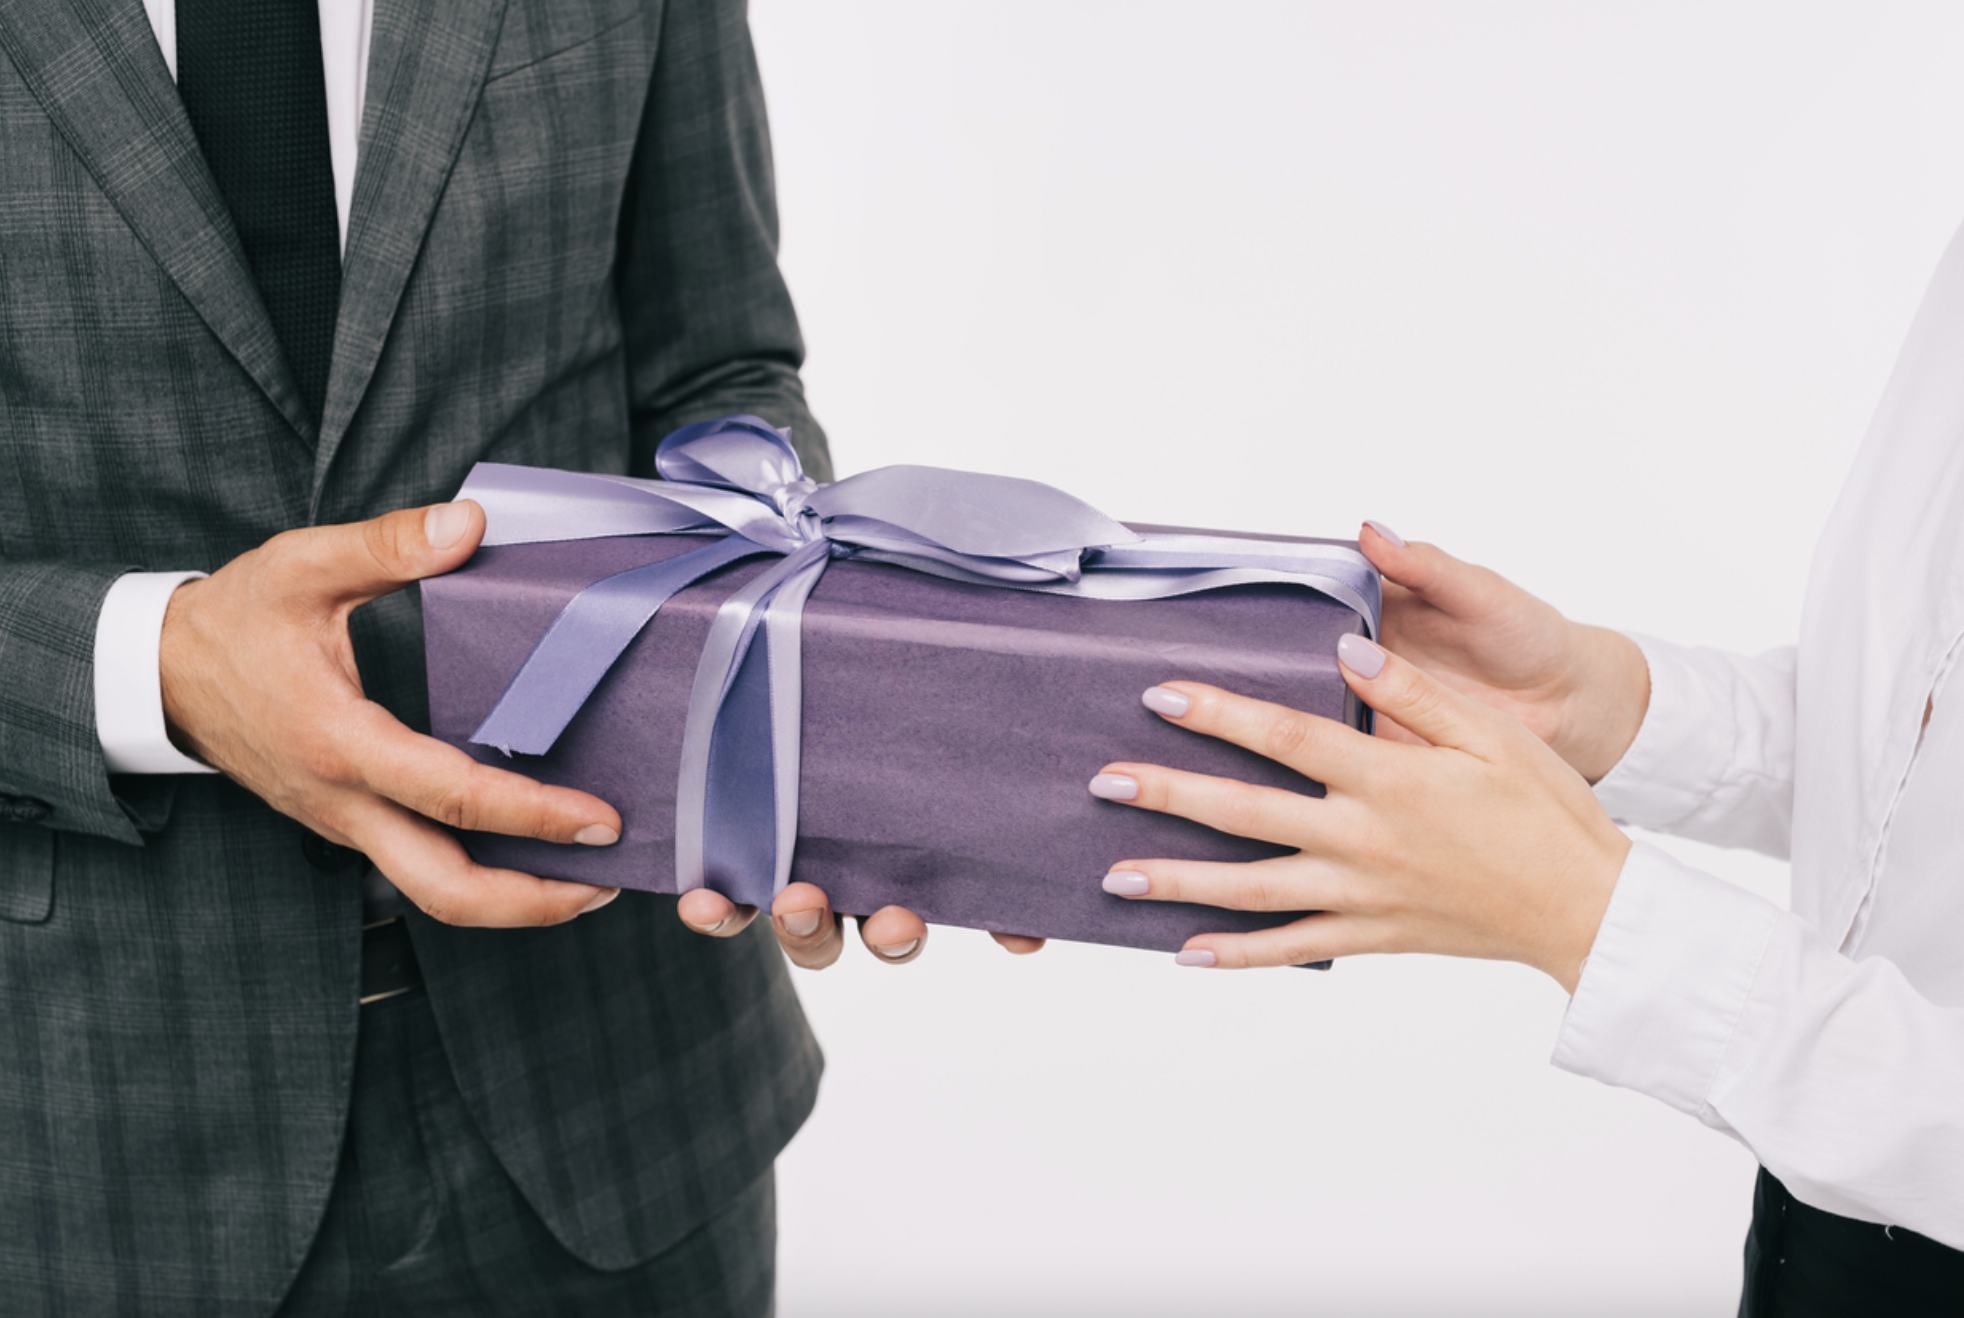 What gift will make the biggest impression on the recipient?